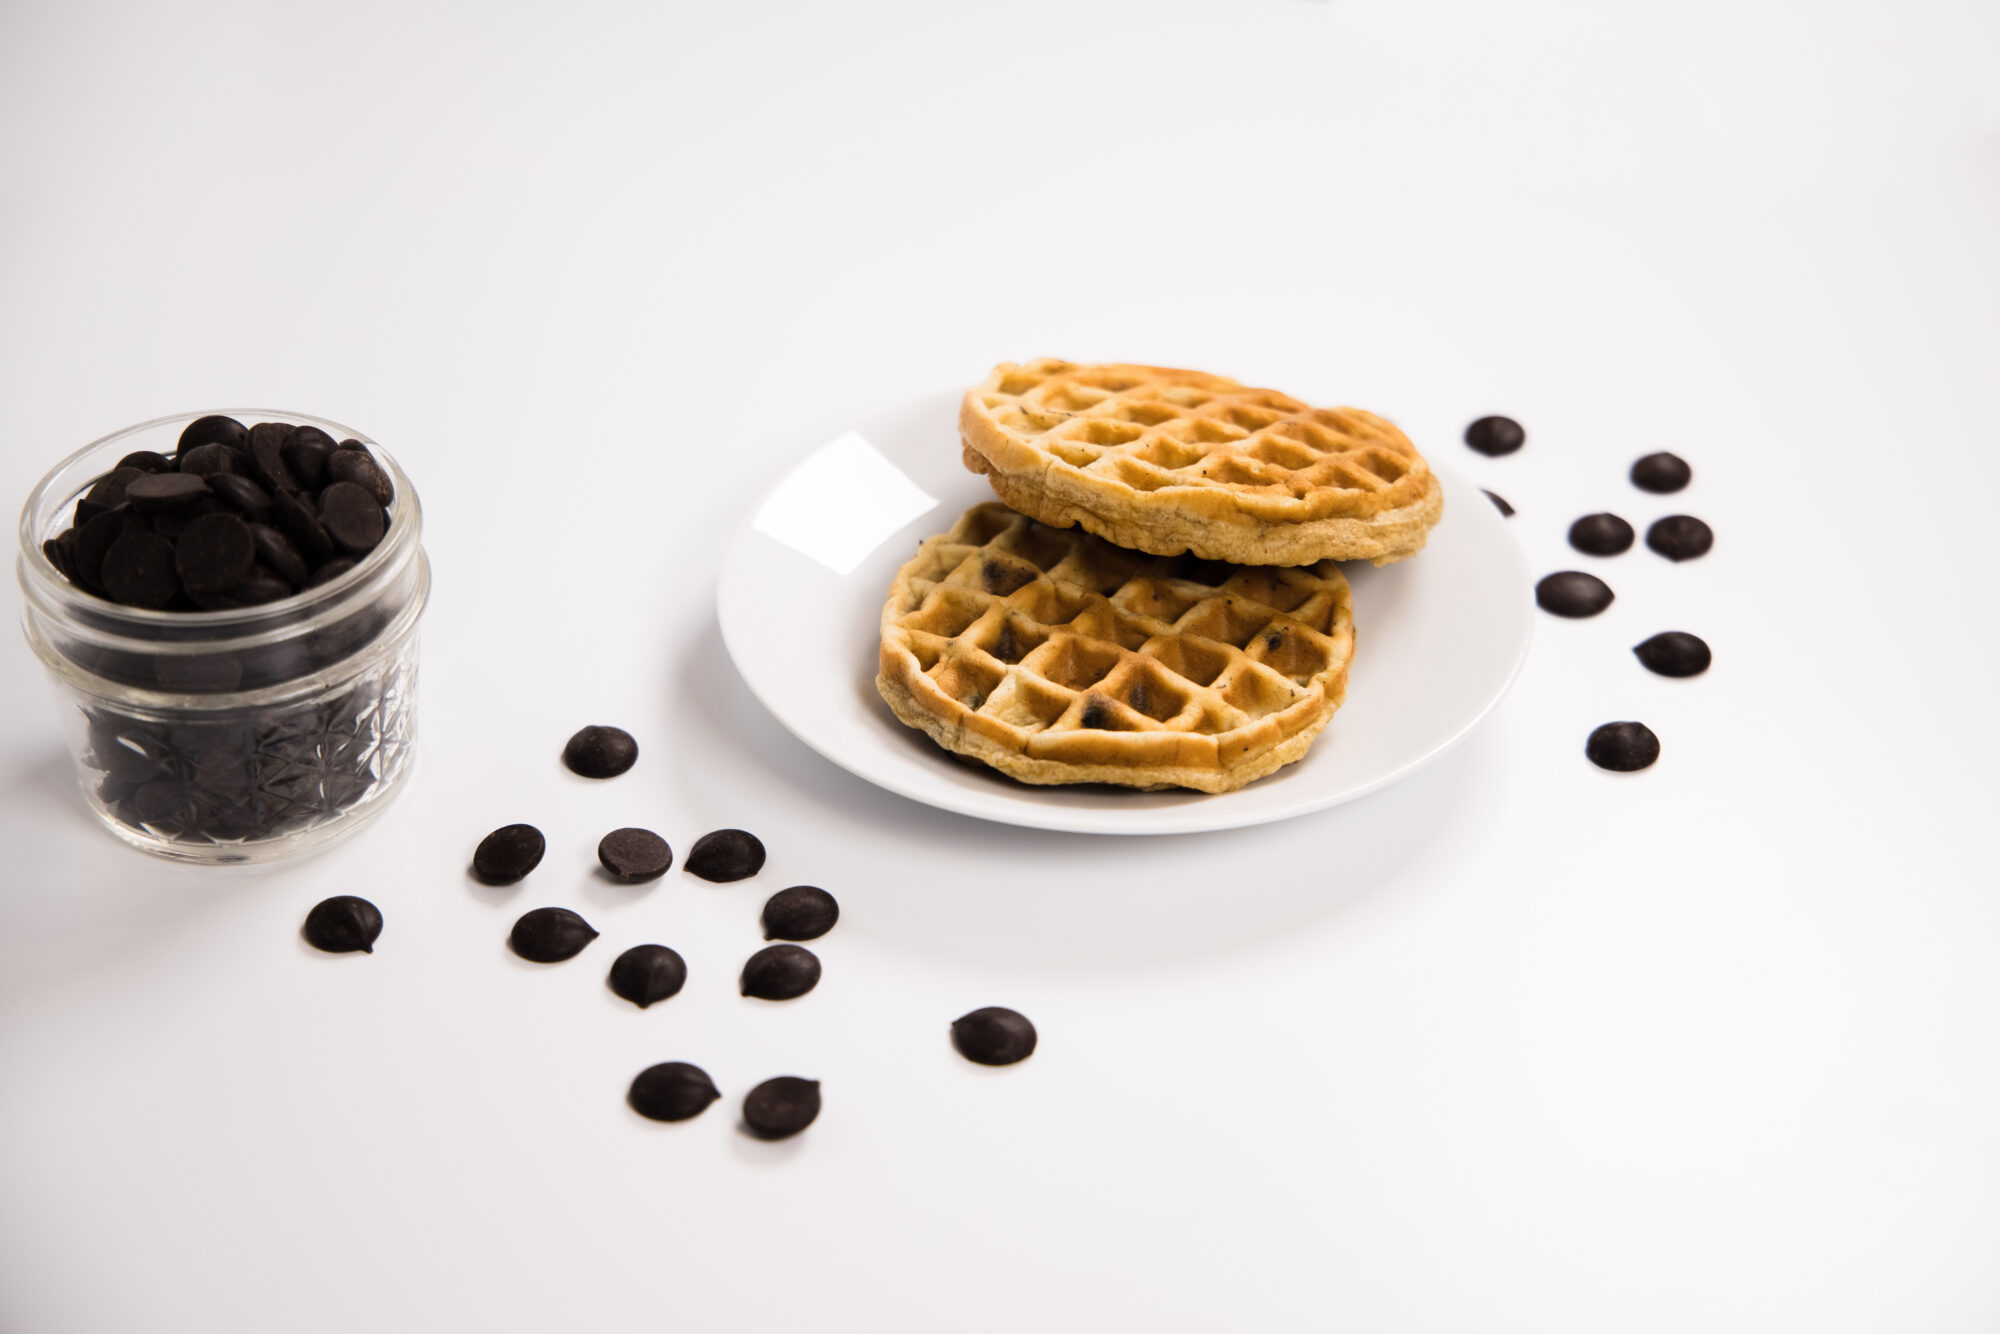 Two Chocolate Chip Chaffles on a white plate surrounded by chocolate chips.